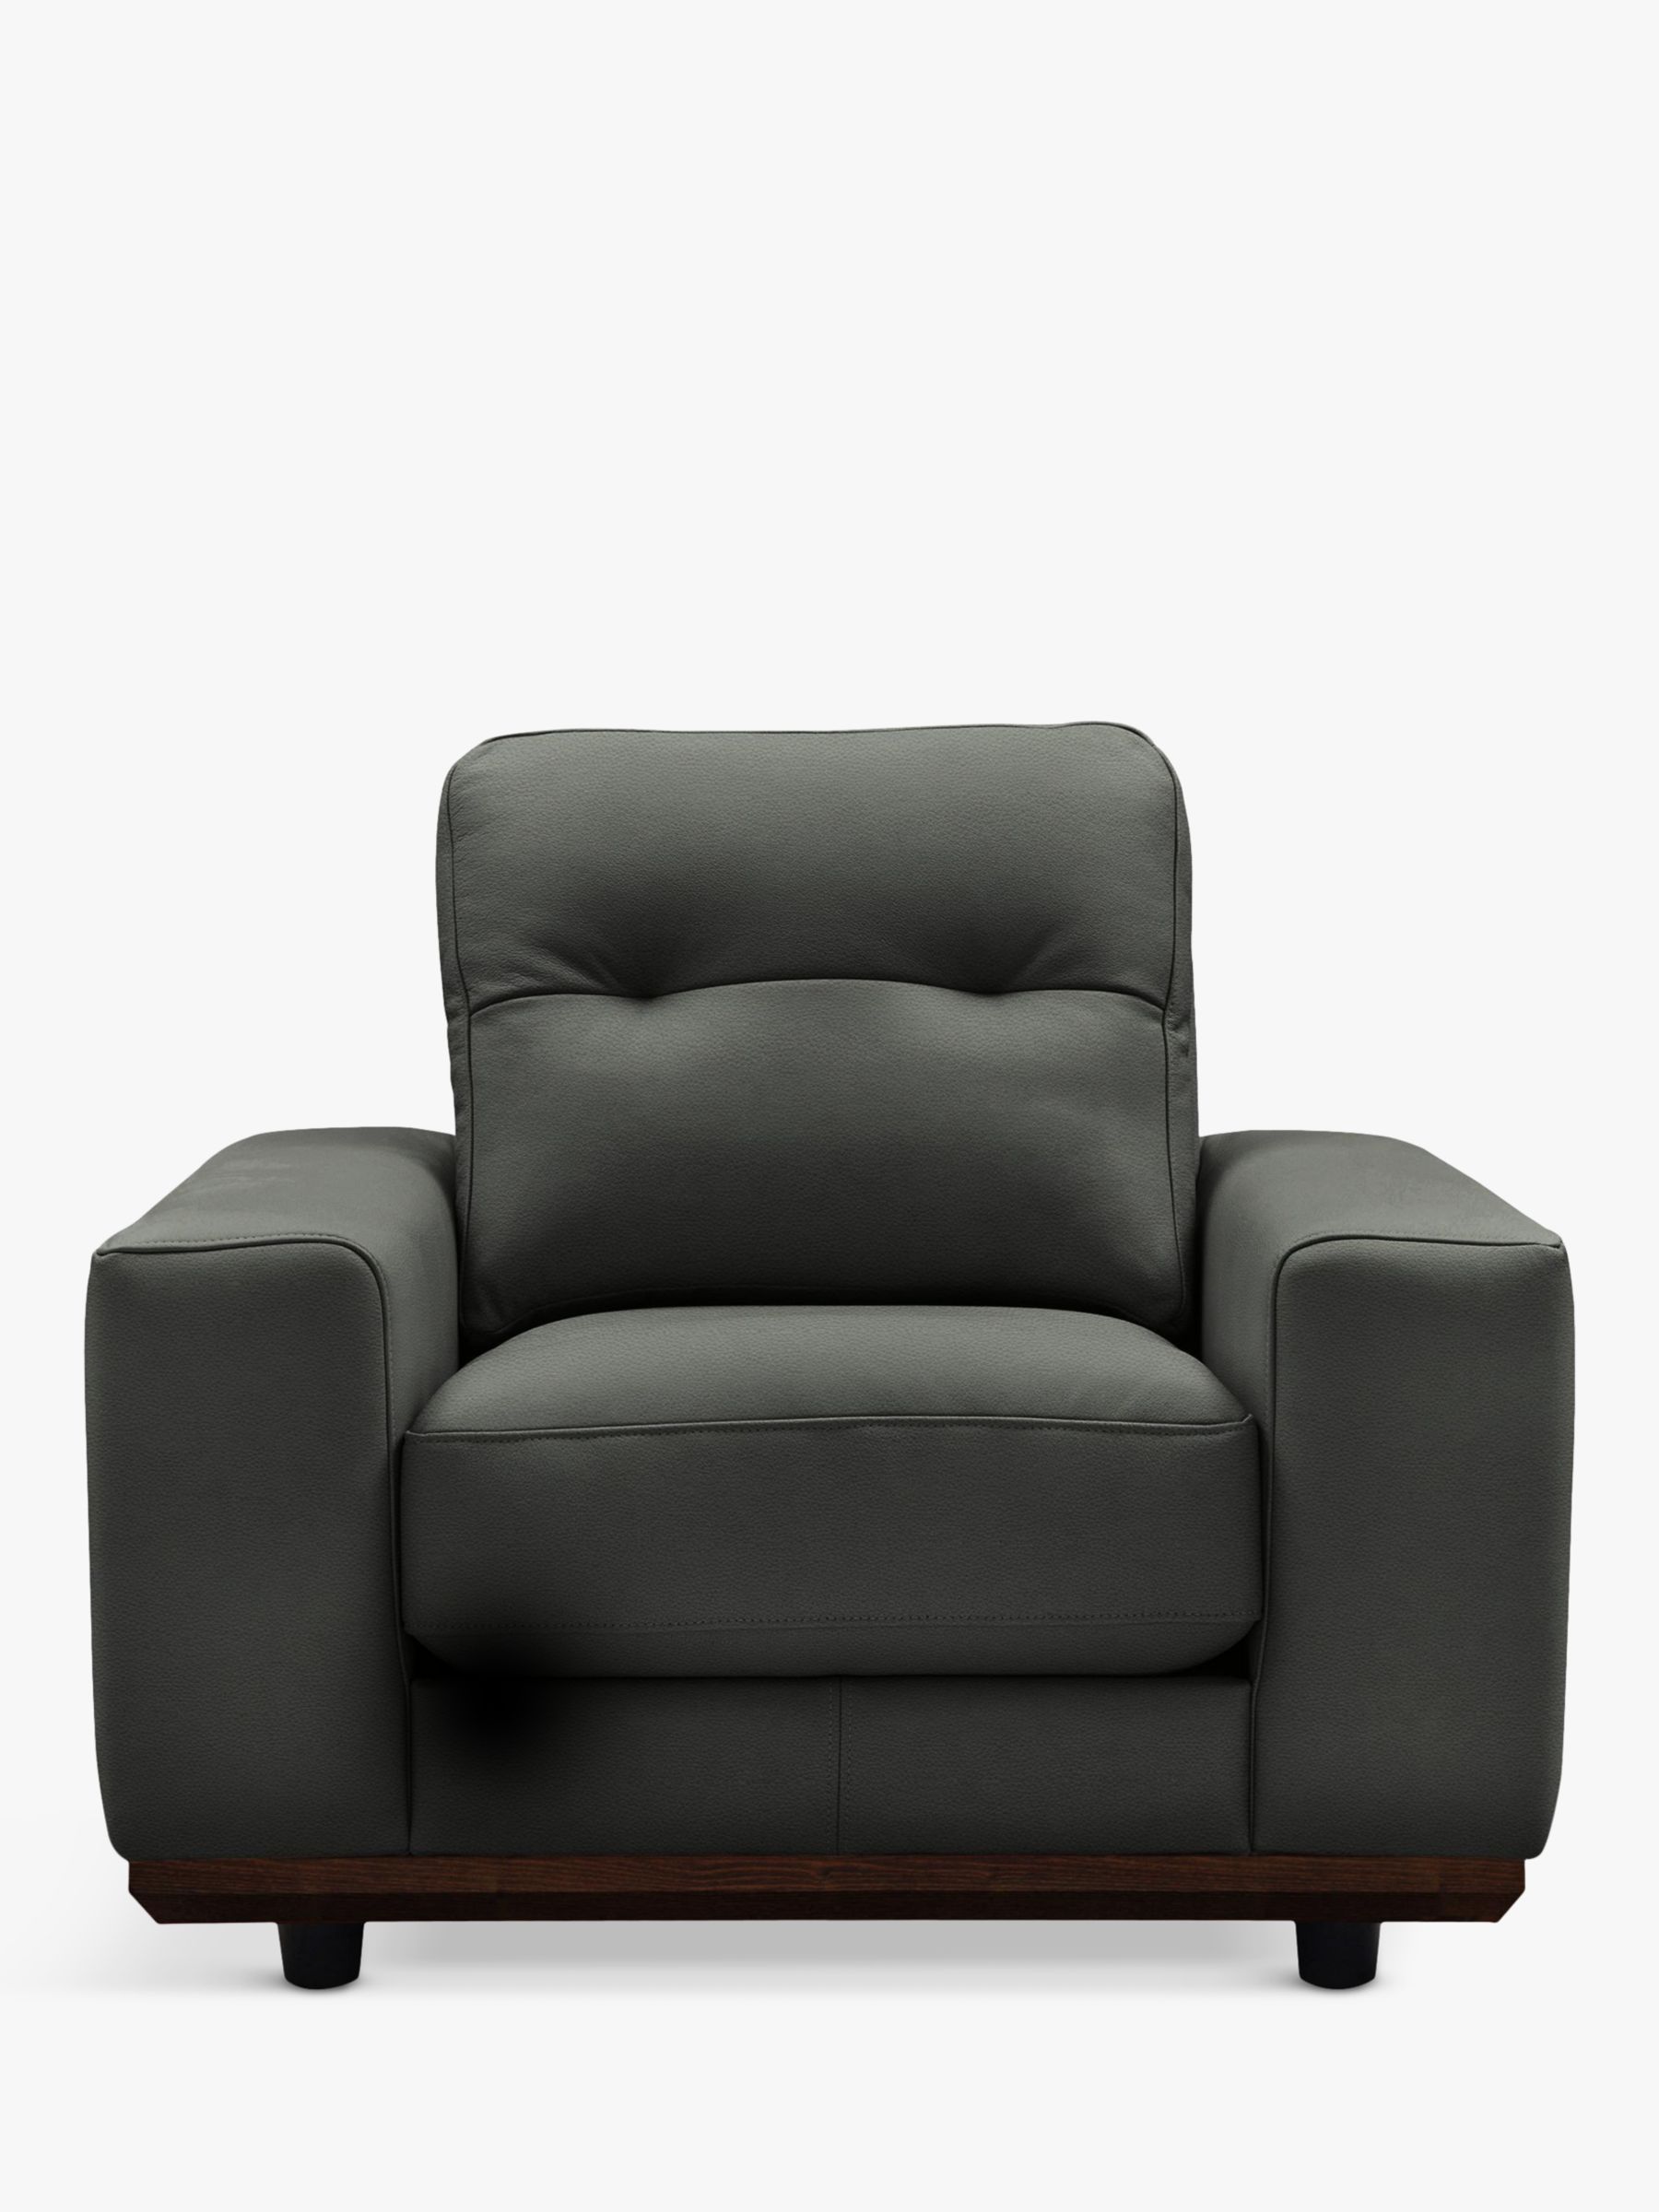 G Plan Vintage The Seventy One Leather Armchair